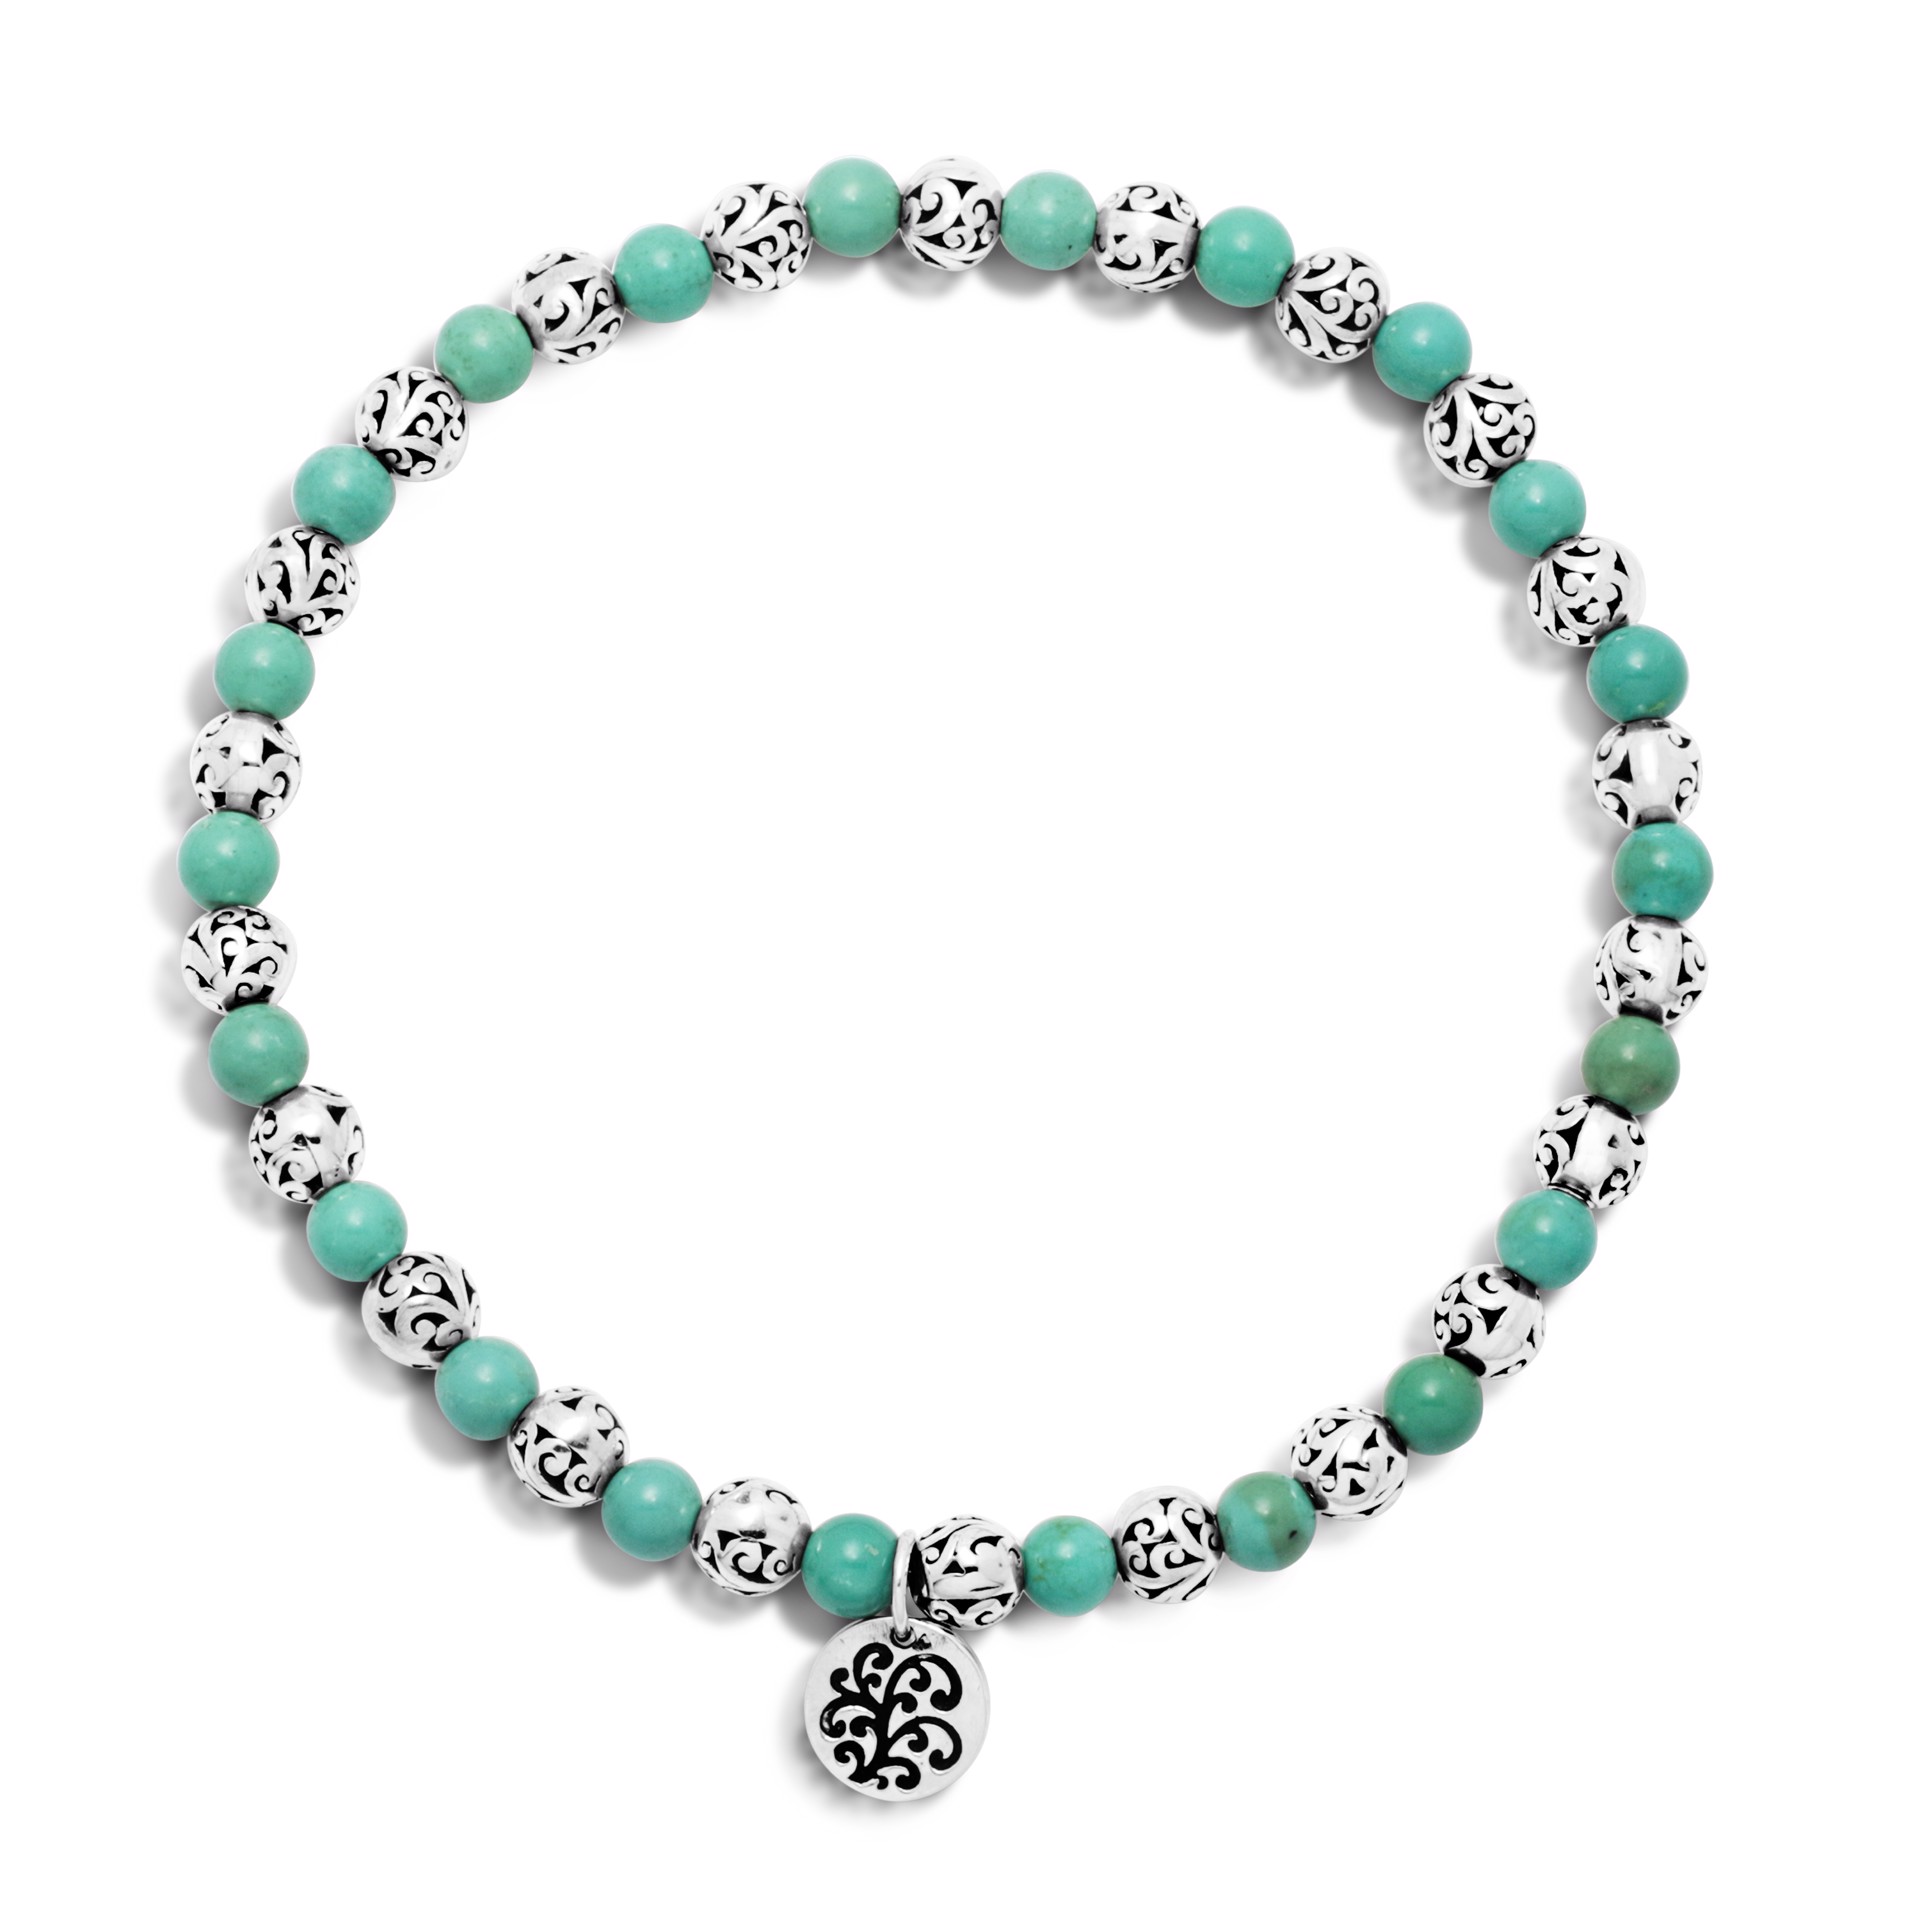 9684 Blue Green Turquoise Bead (4mm) with Scroll Sterling Silver Bead Stretch Bracelet by Lois Hill